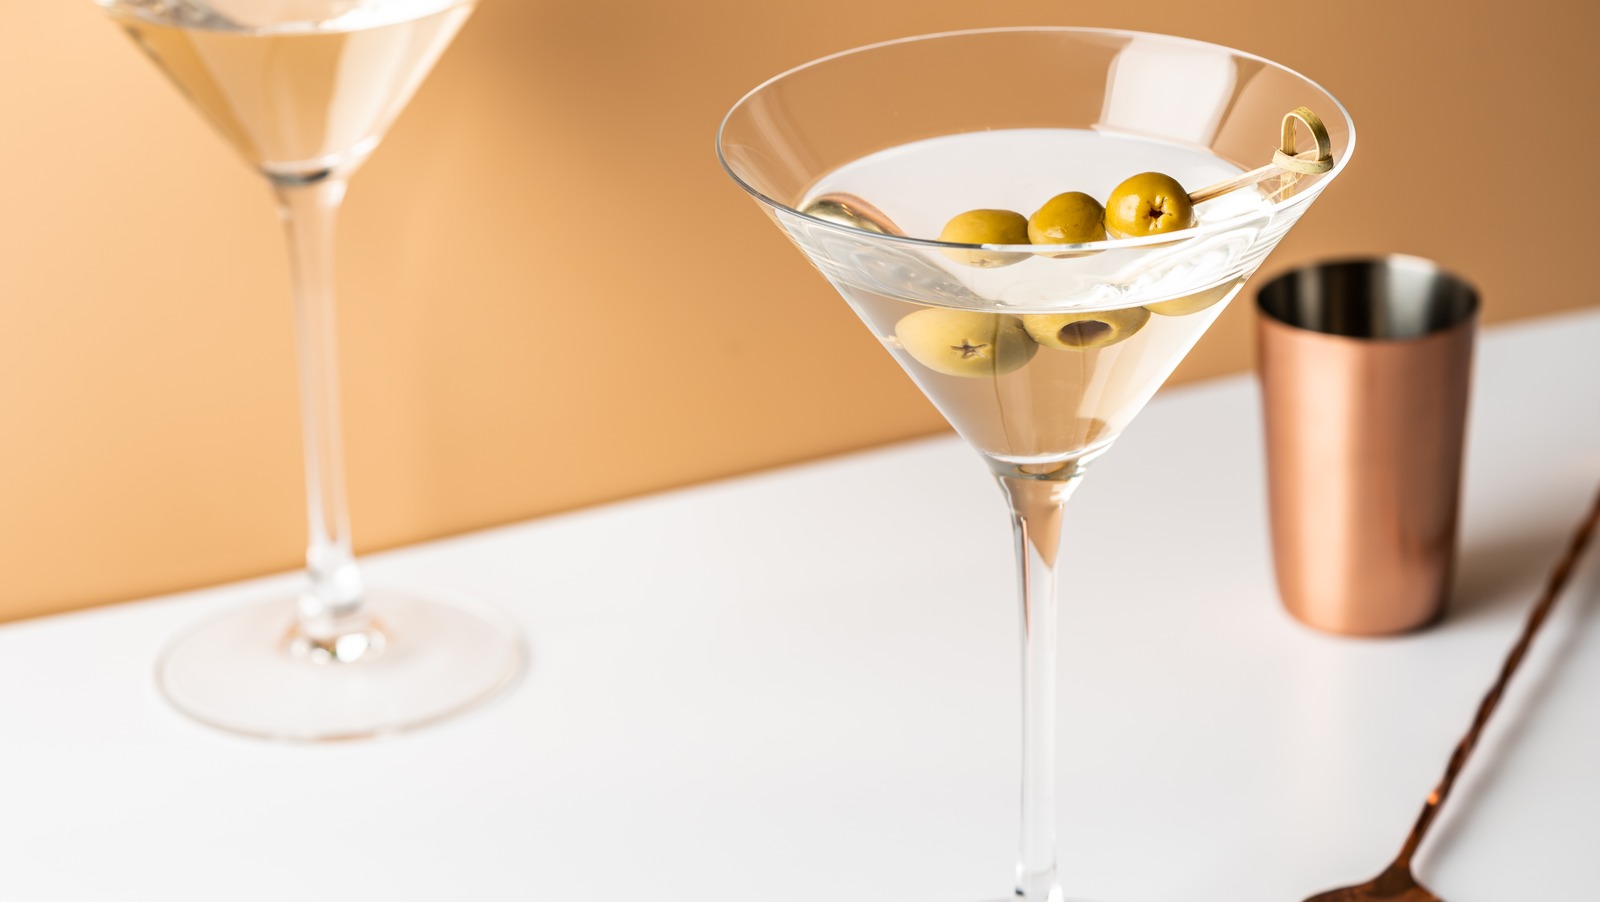 https://www.tastingtable.com/img/gallery/the-dos-and-donts-of-ordering-a-martini/l-intro-1675719014.jpg